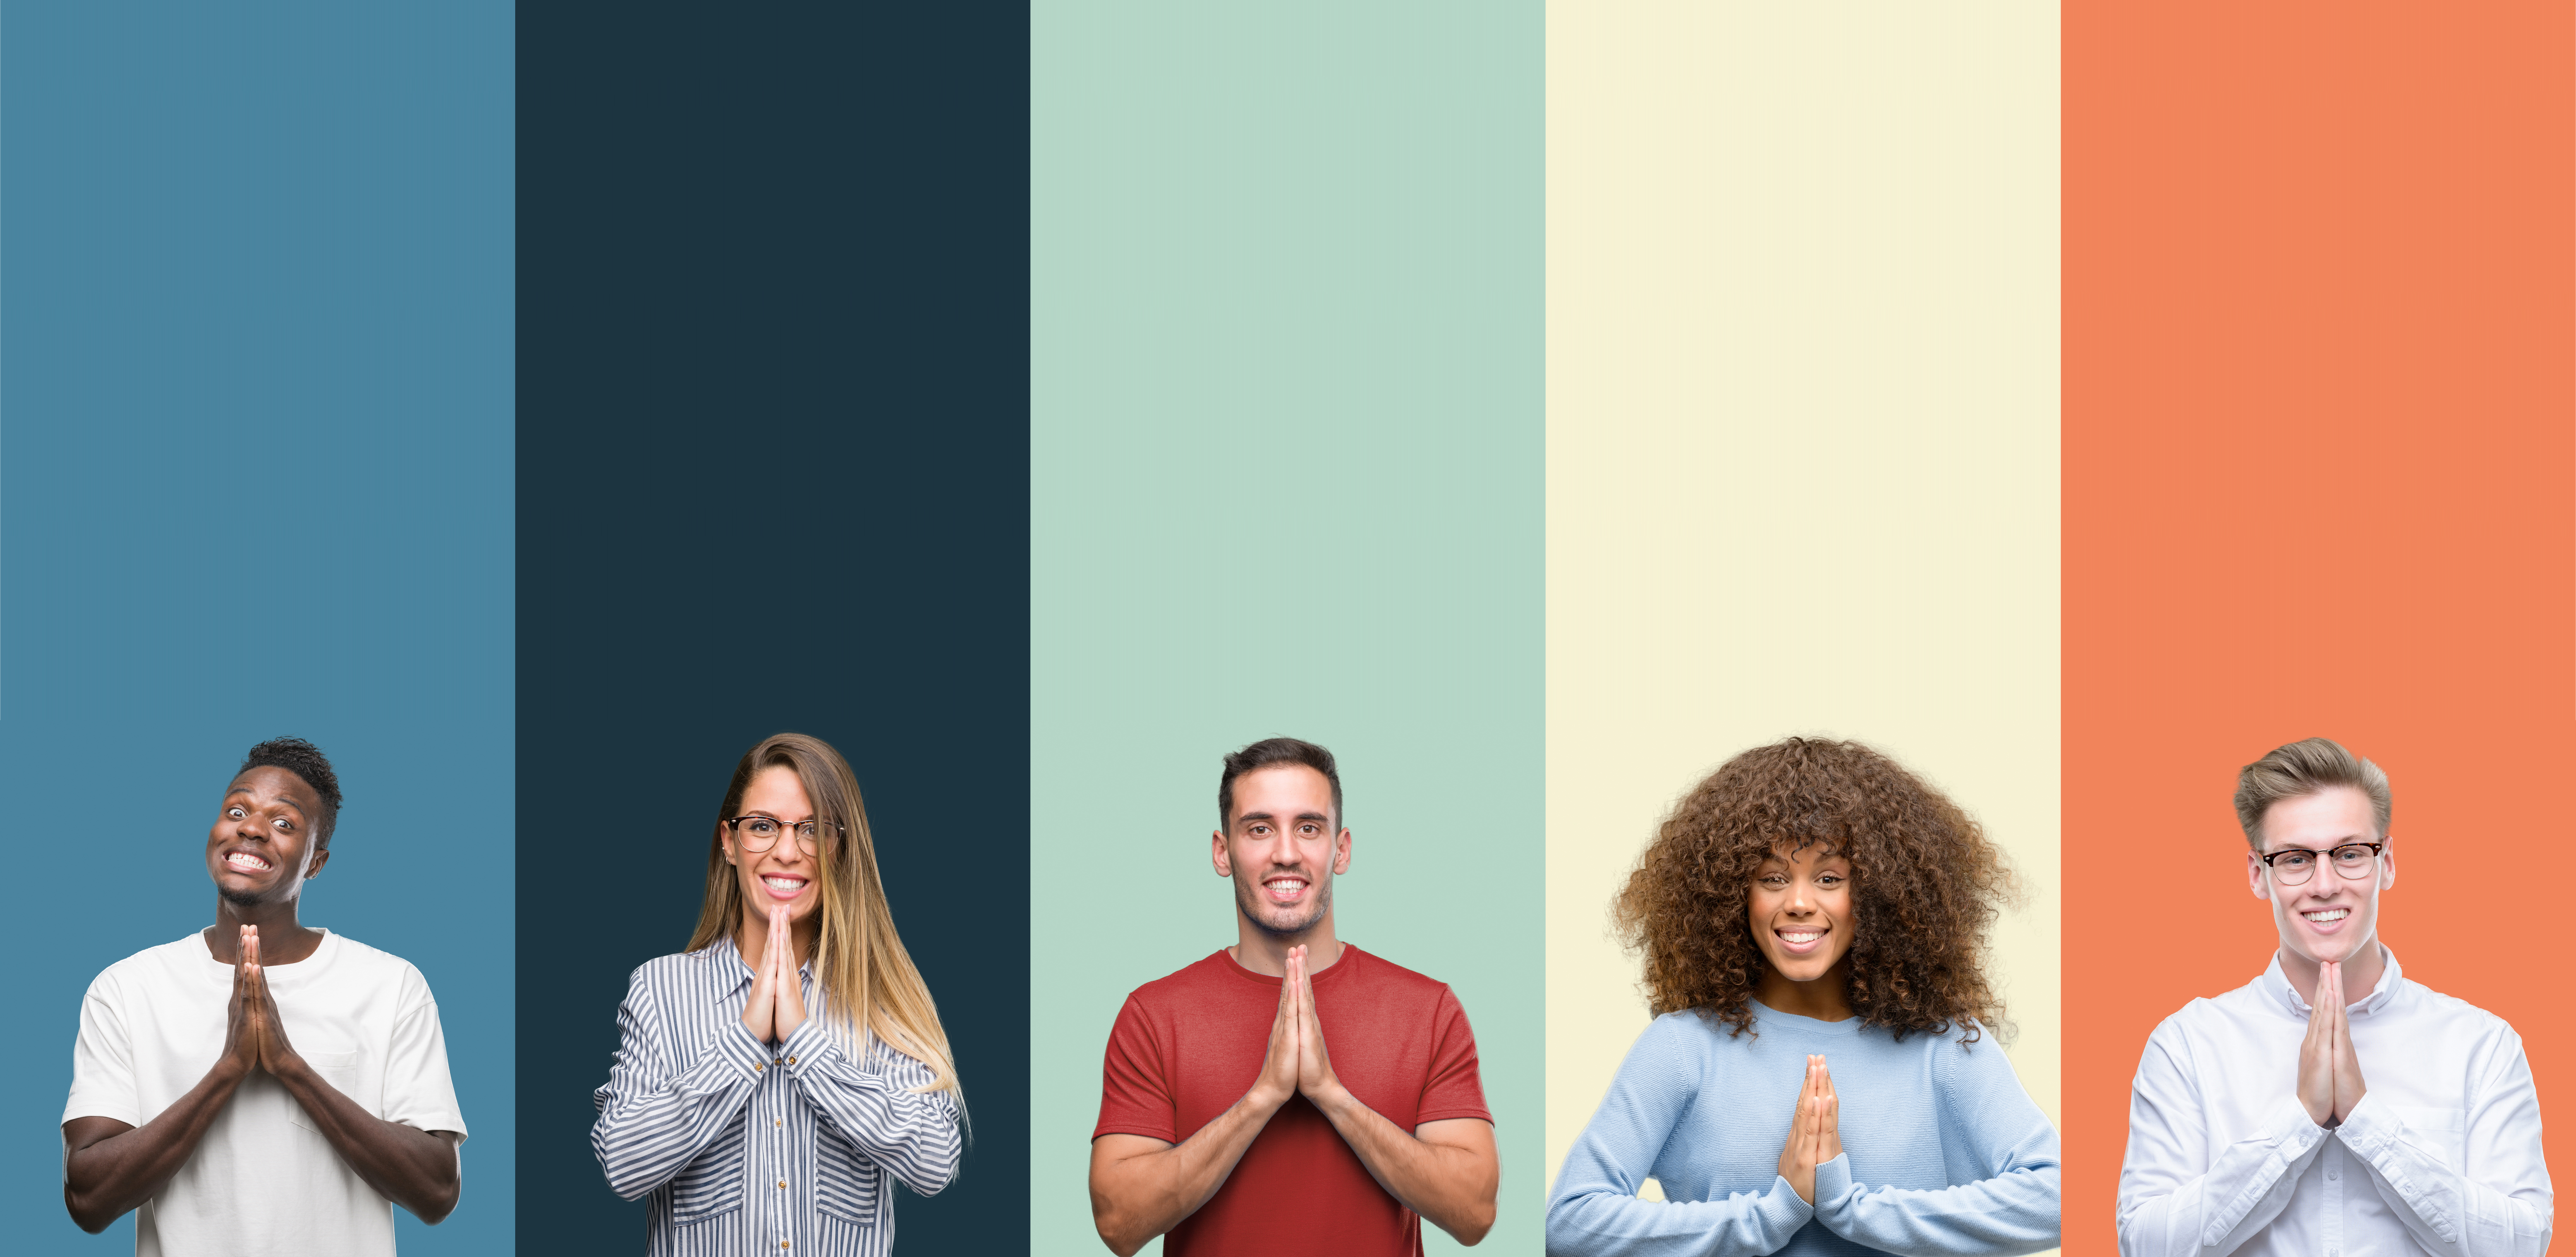 Group of people over vintage colors background praying with hands together asking for forgiveness smiling confident.